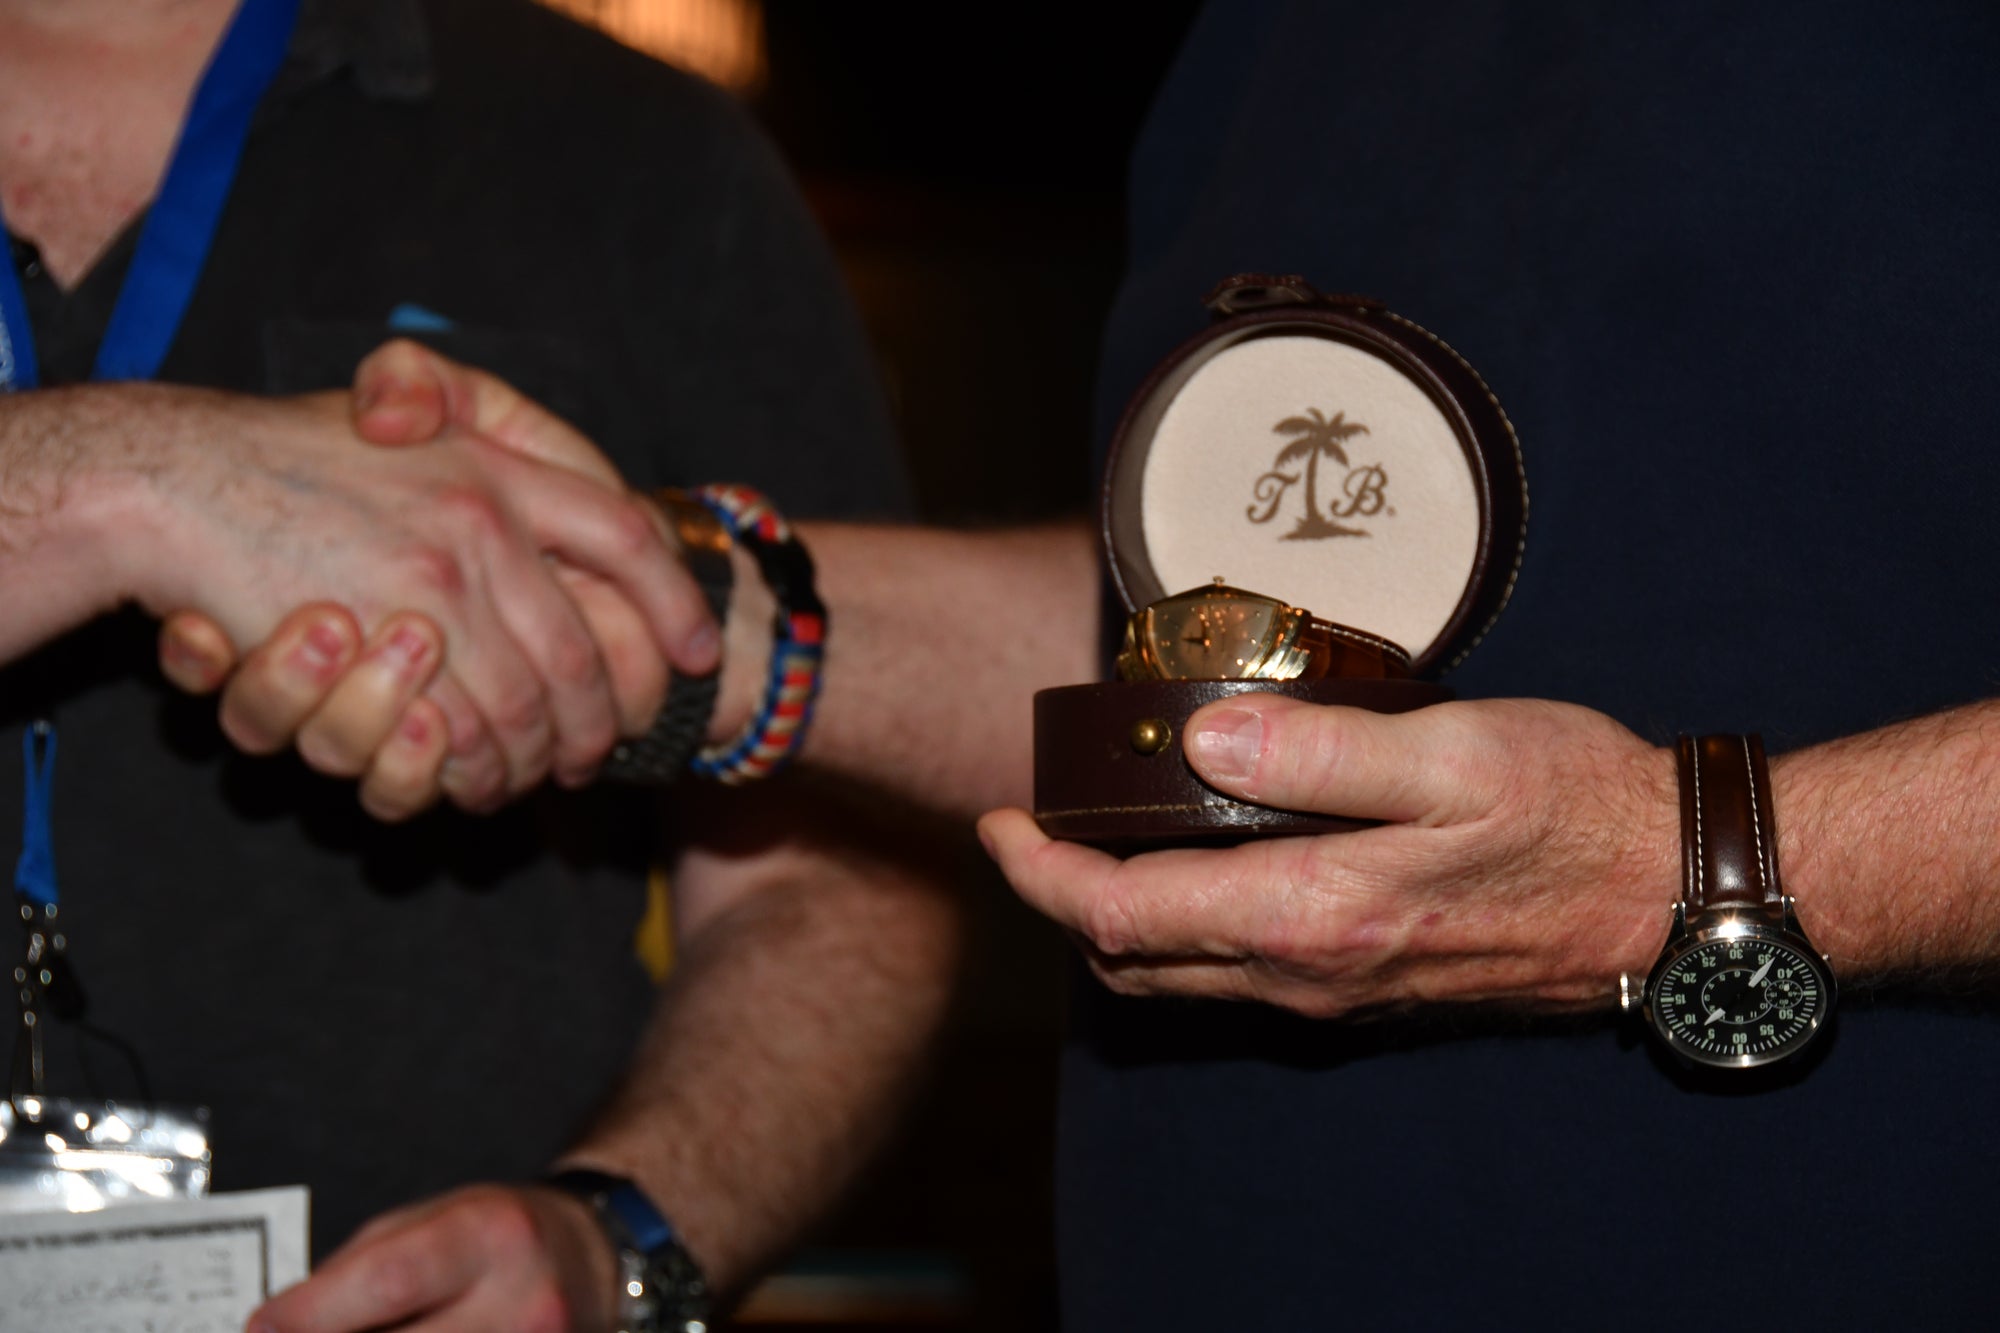 Veterans Watchmaker Initiative: Why I Care & Why You Should Too